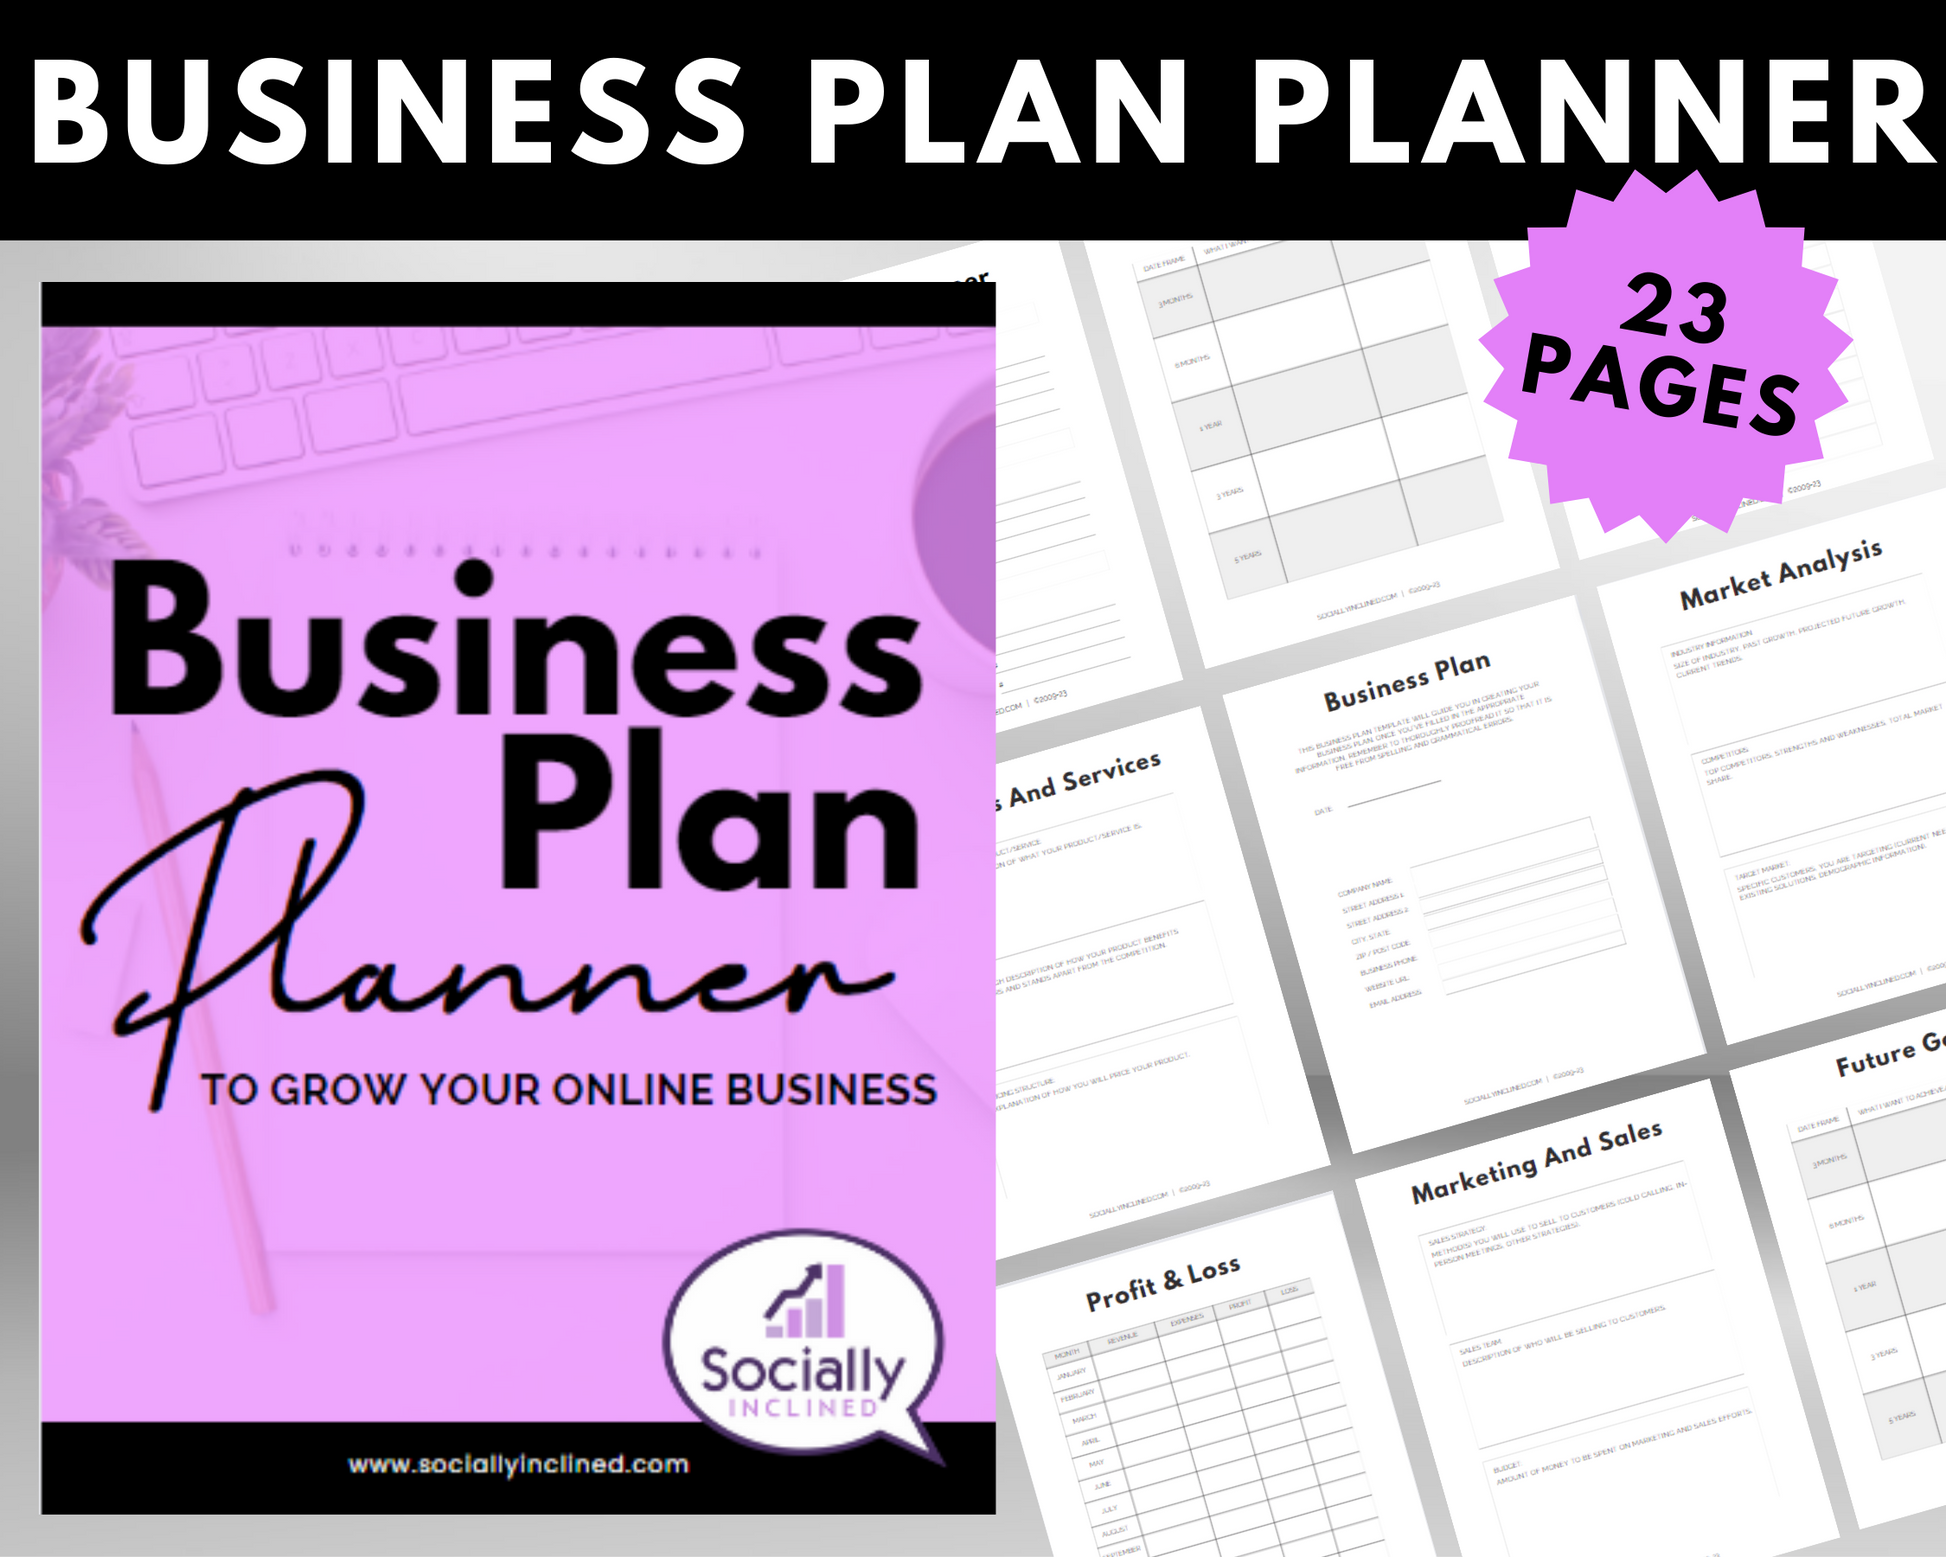 A Get Socially Inclined Business Plan Planner with the words business plan planner.